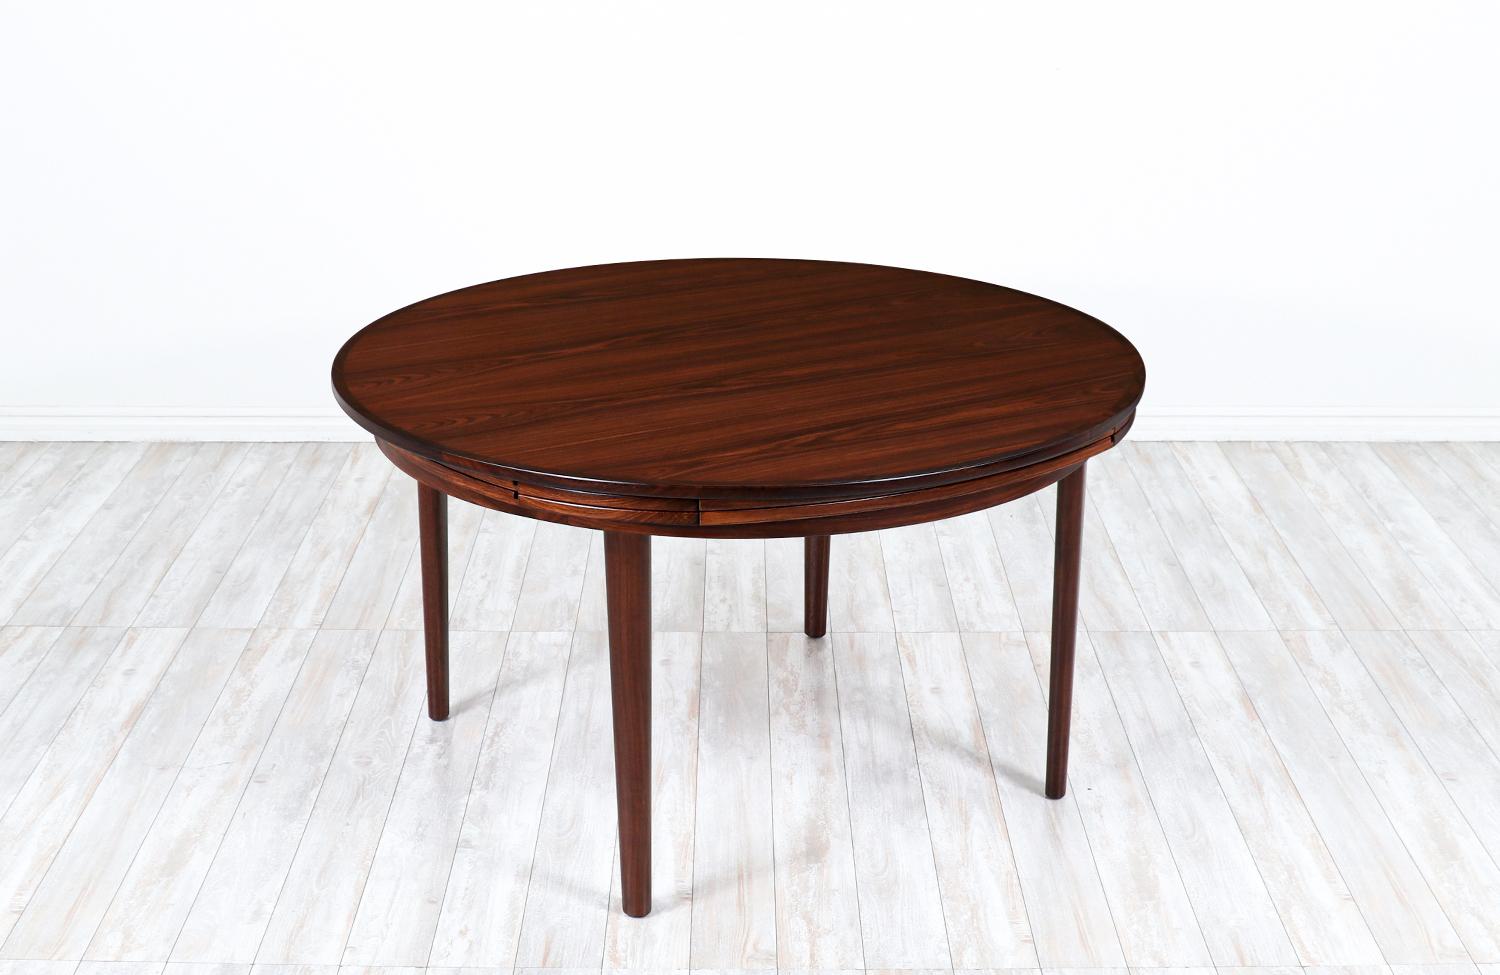 Stylish dining table designed and crafted by the famous Danish company Dyrlund in Denmark circa 1960s. This iconic table features a solid brazilian rosewood circular top with built-in extension leaves that store and draw when need to accommodate up